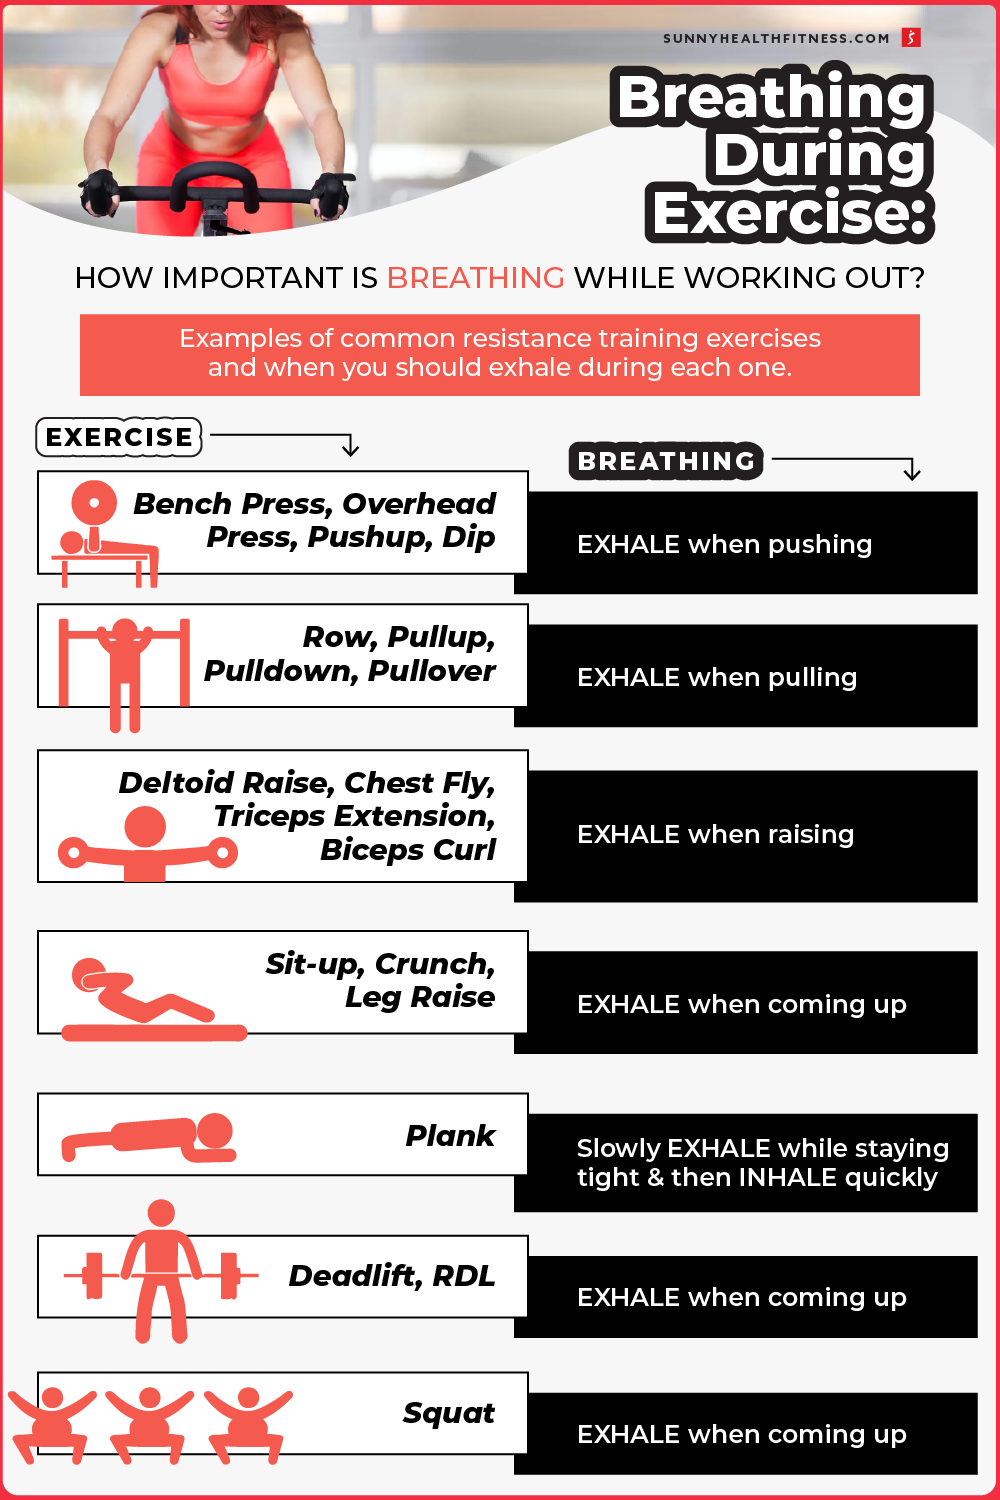 Breathing During Exercise